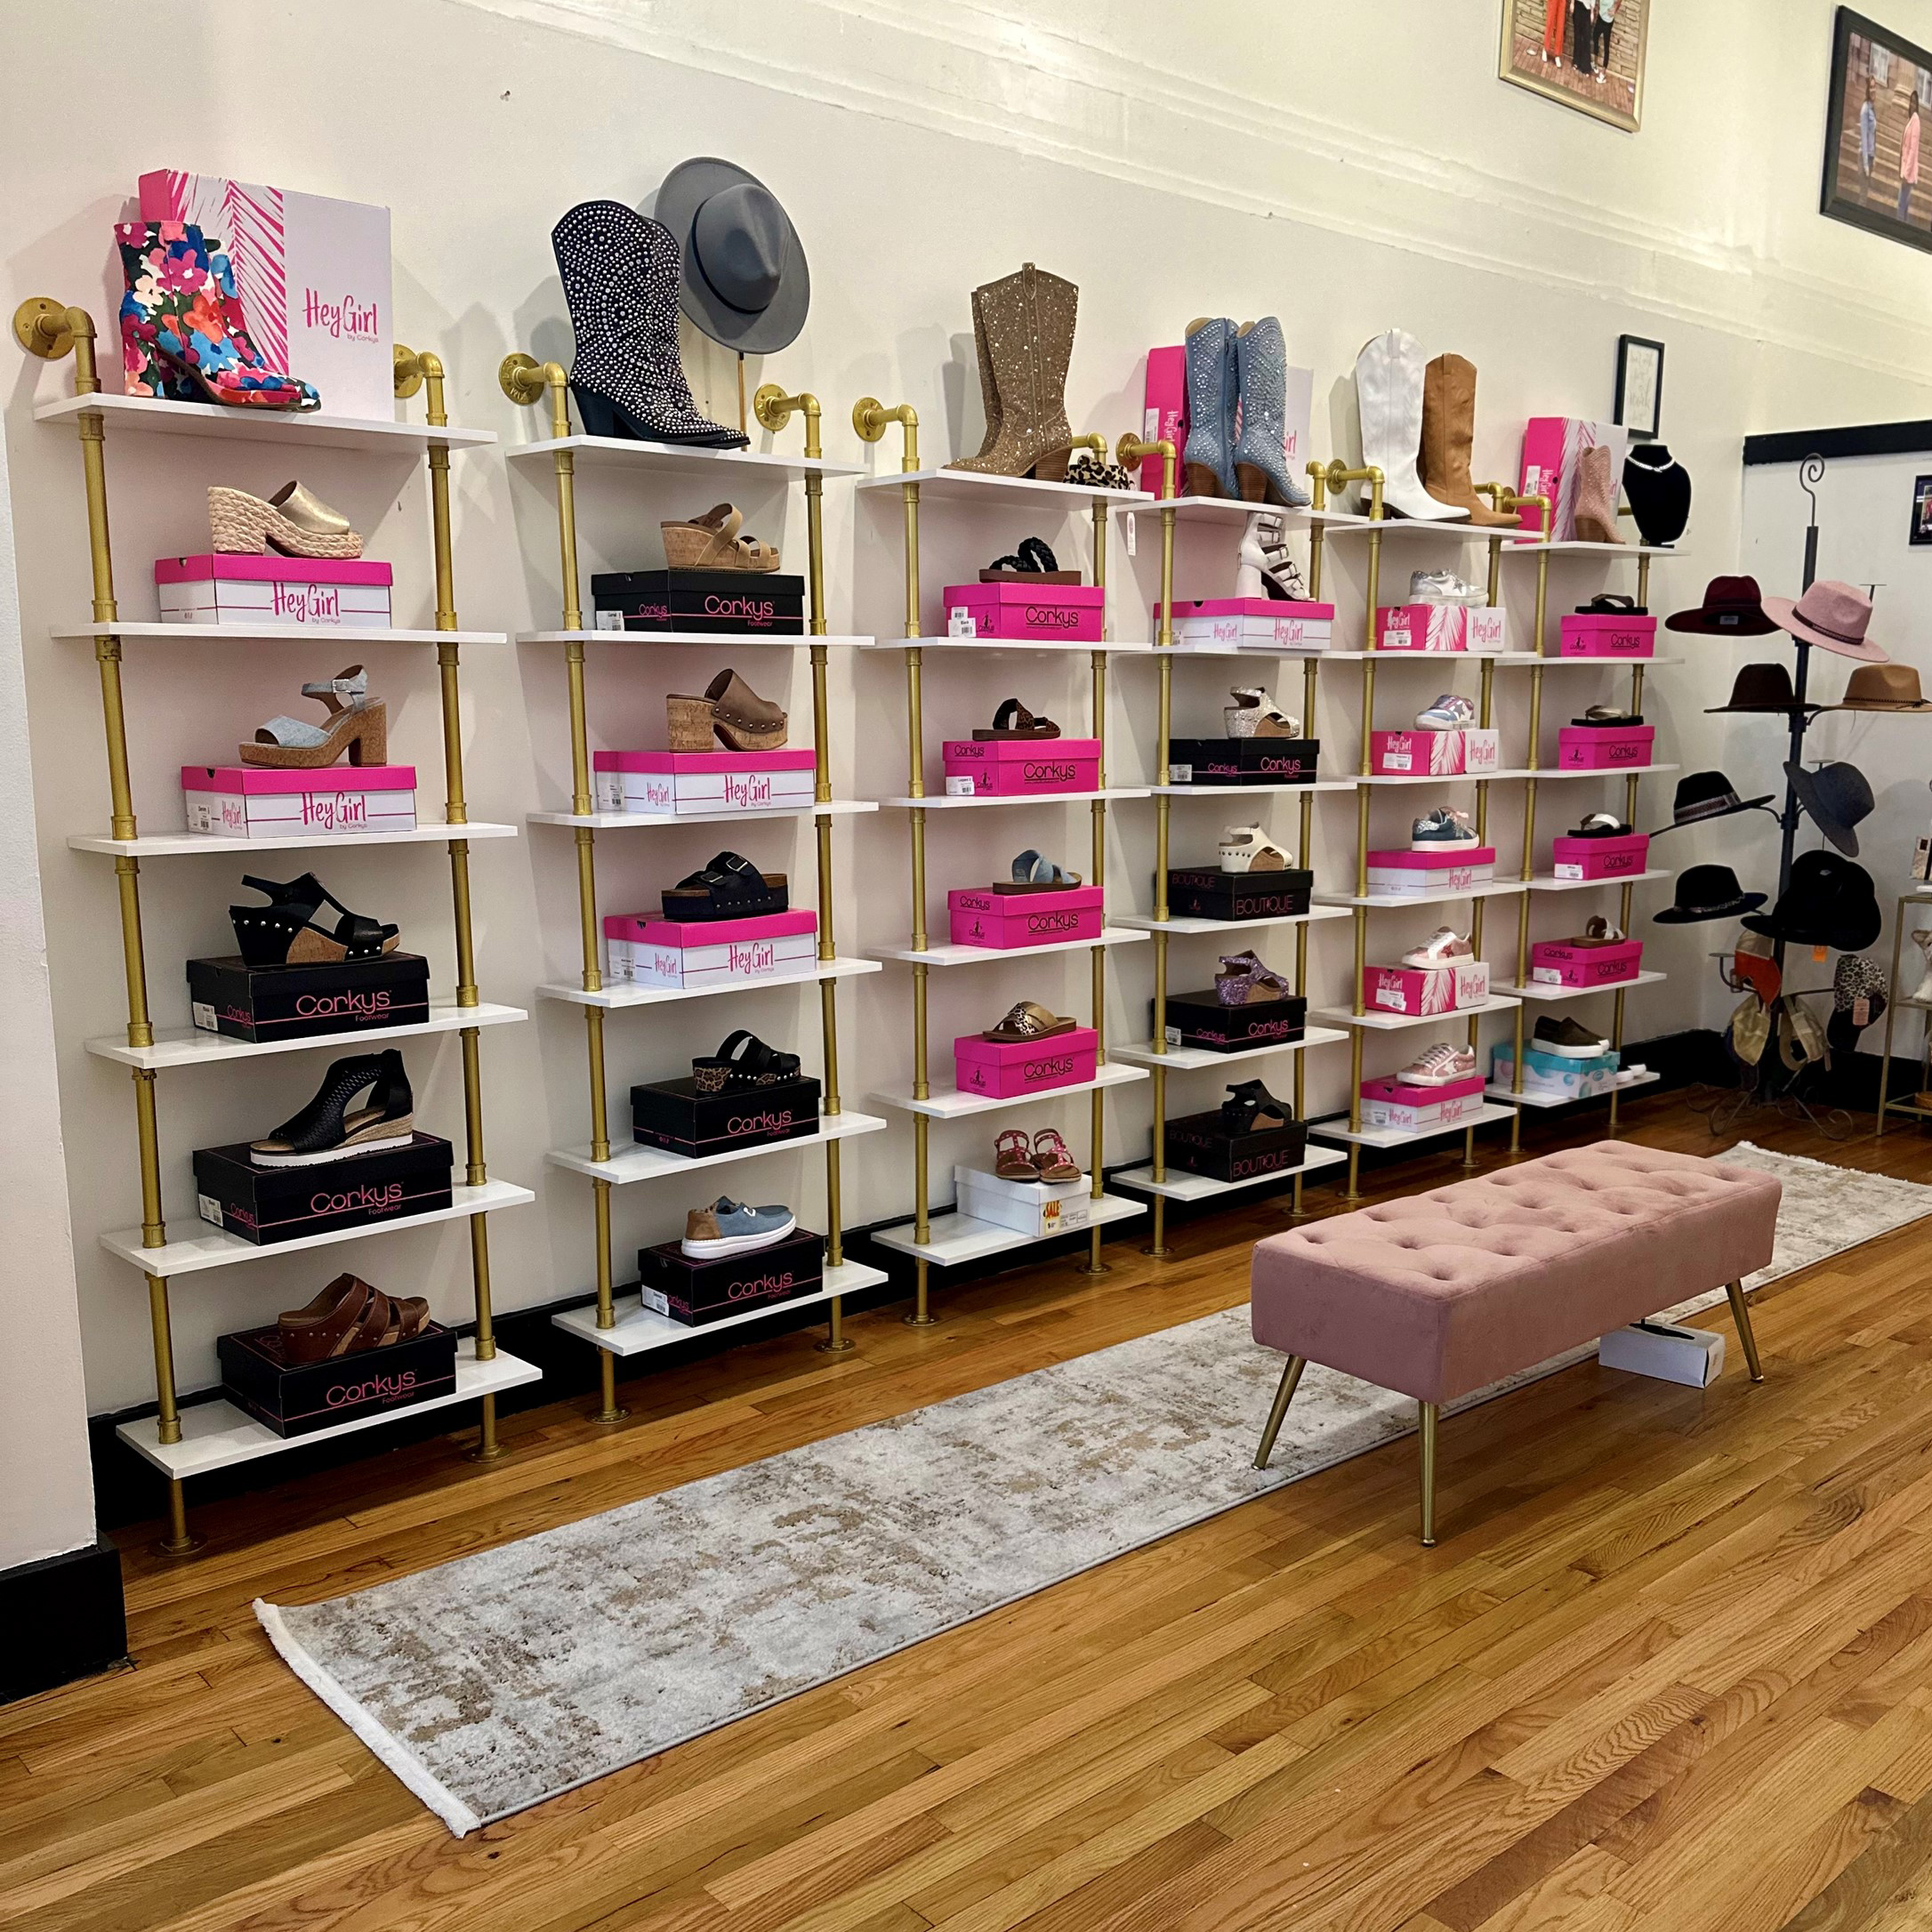 Ruthie Darling Boutique owned by Michelle Gannon ’07